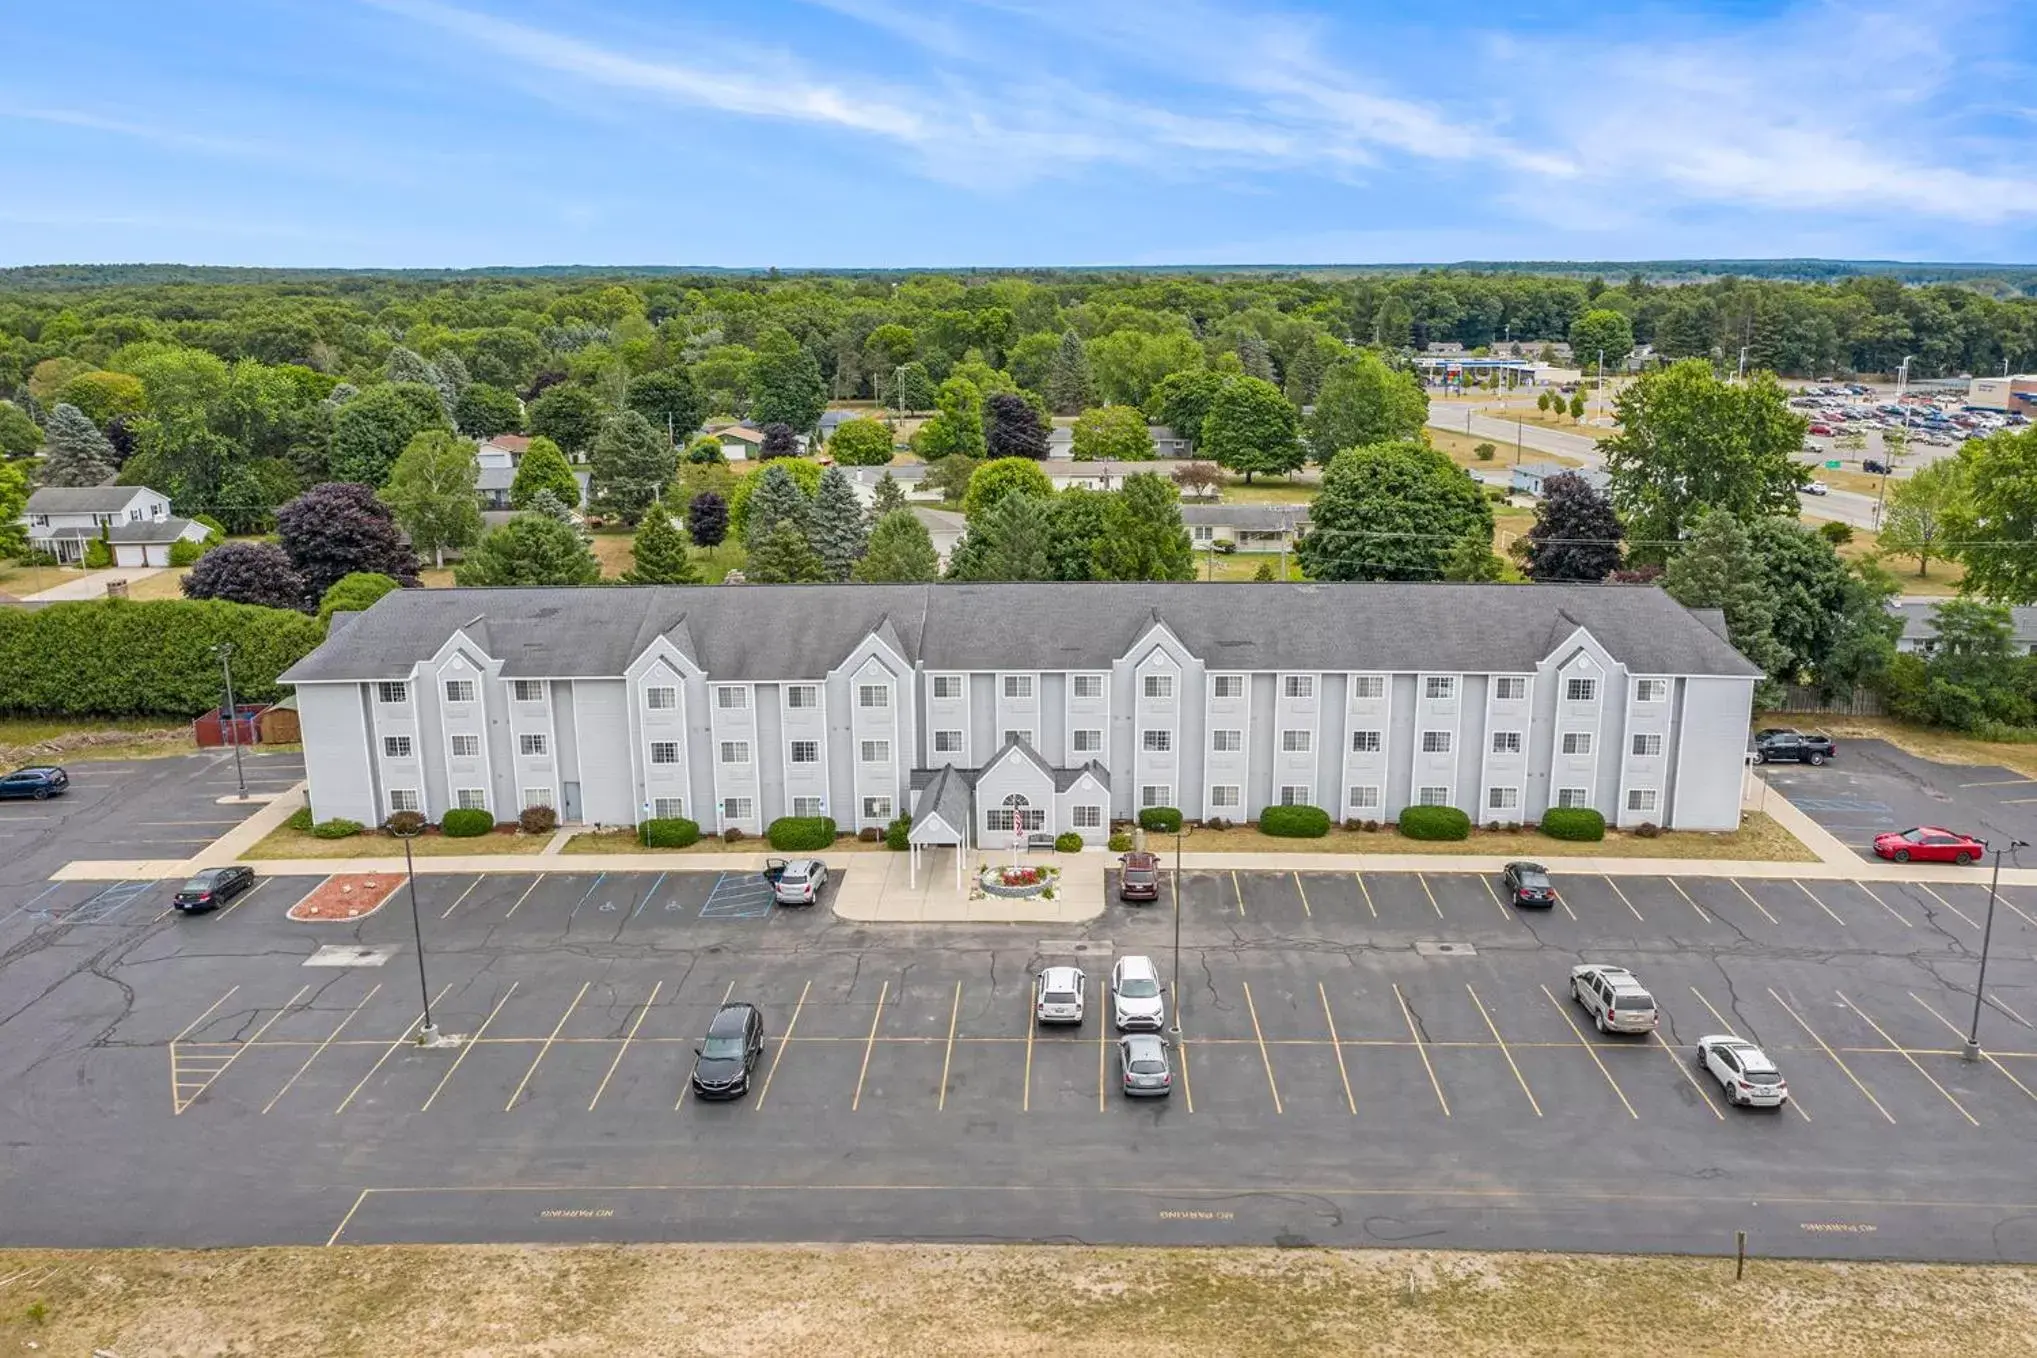 Property building in Microtel Inn and Suites Manistee